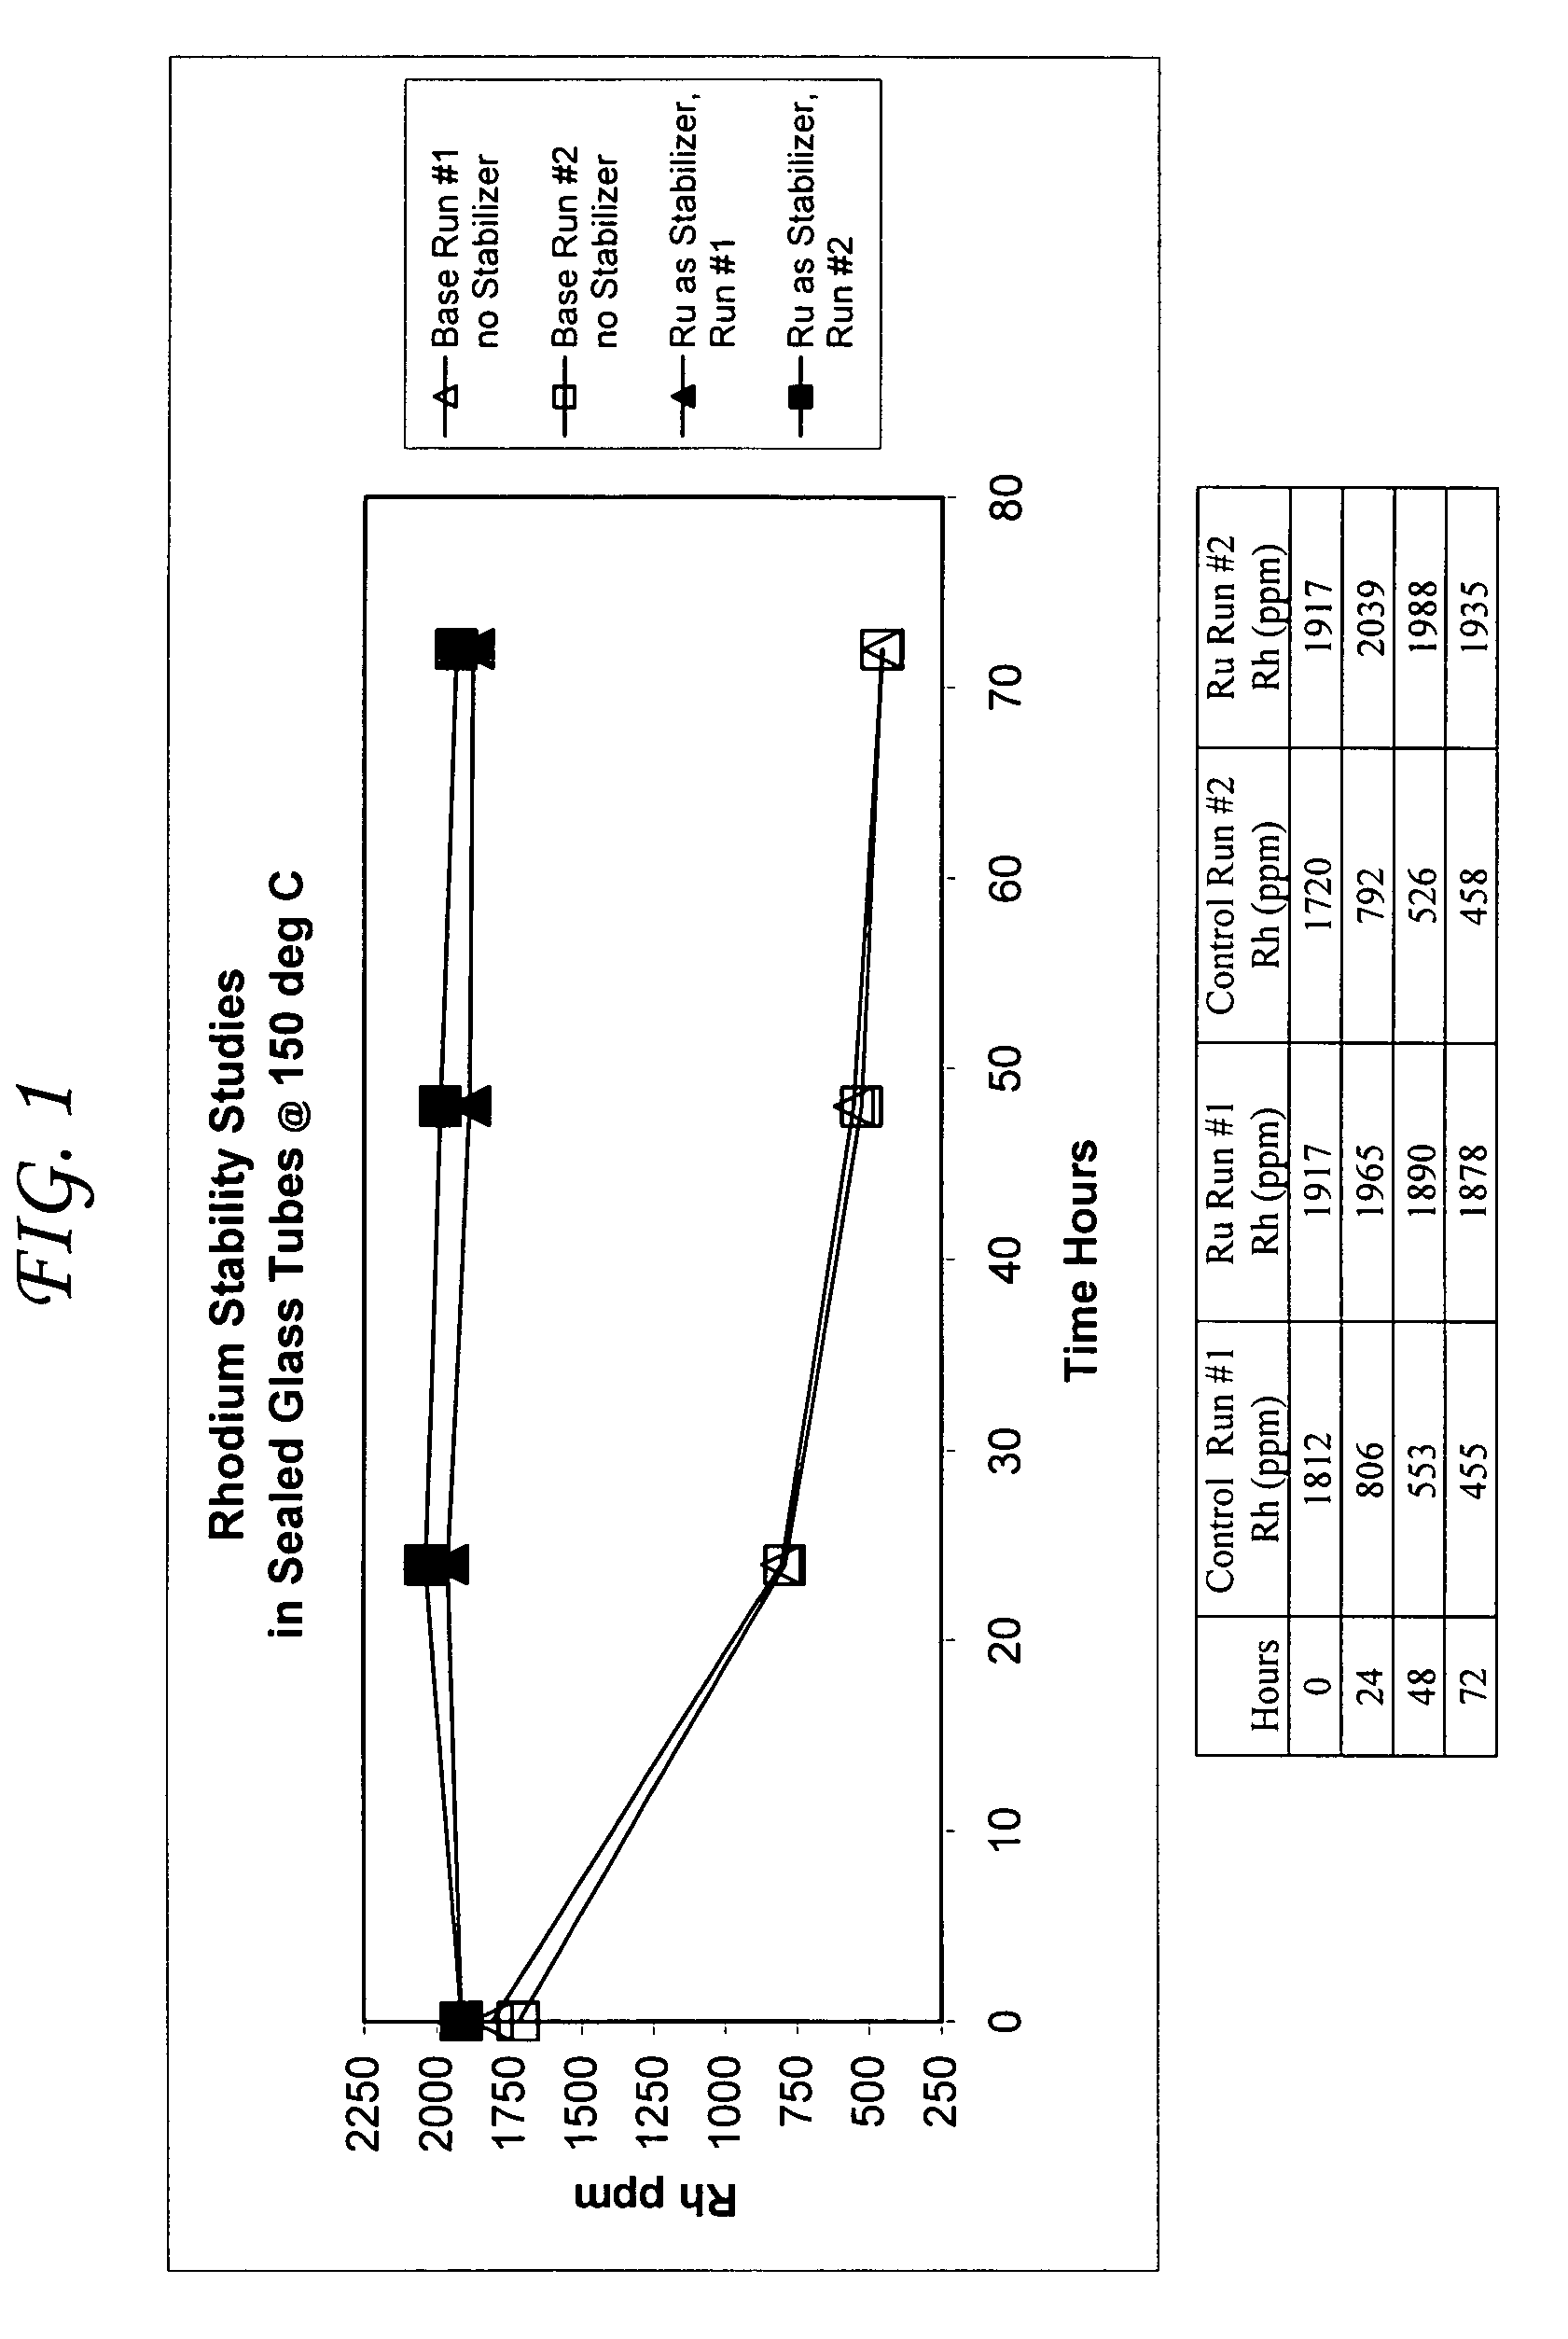 Acetic acid production methods incorporating at least one metal salt as a catalyst stabilizer